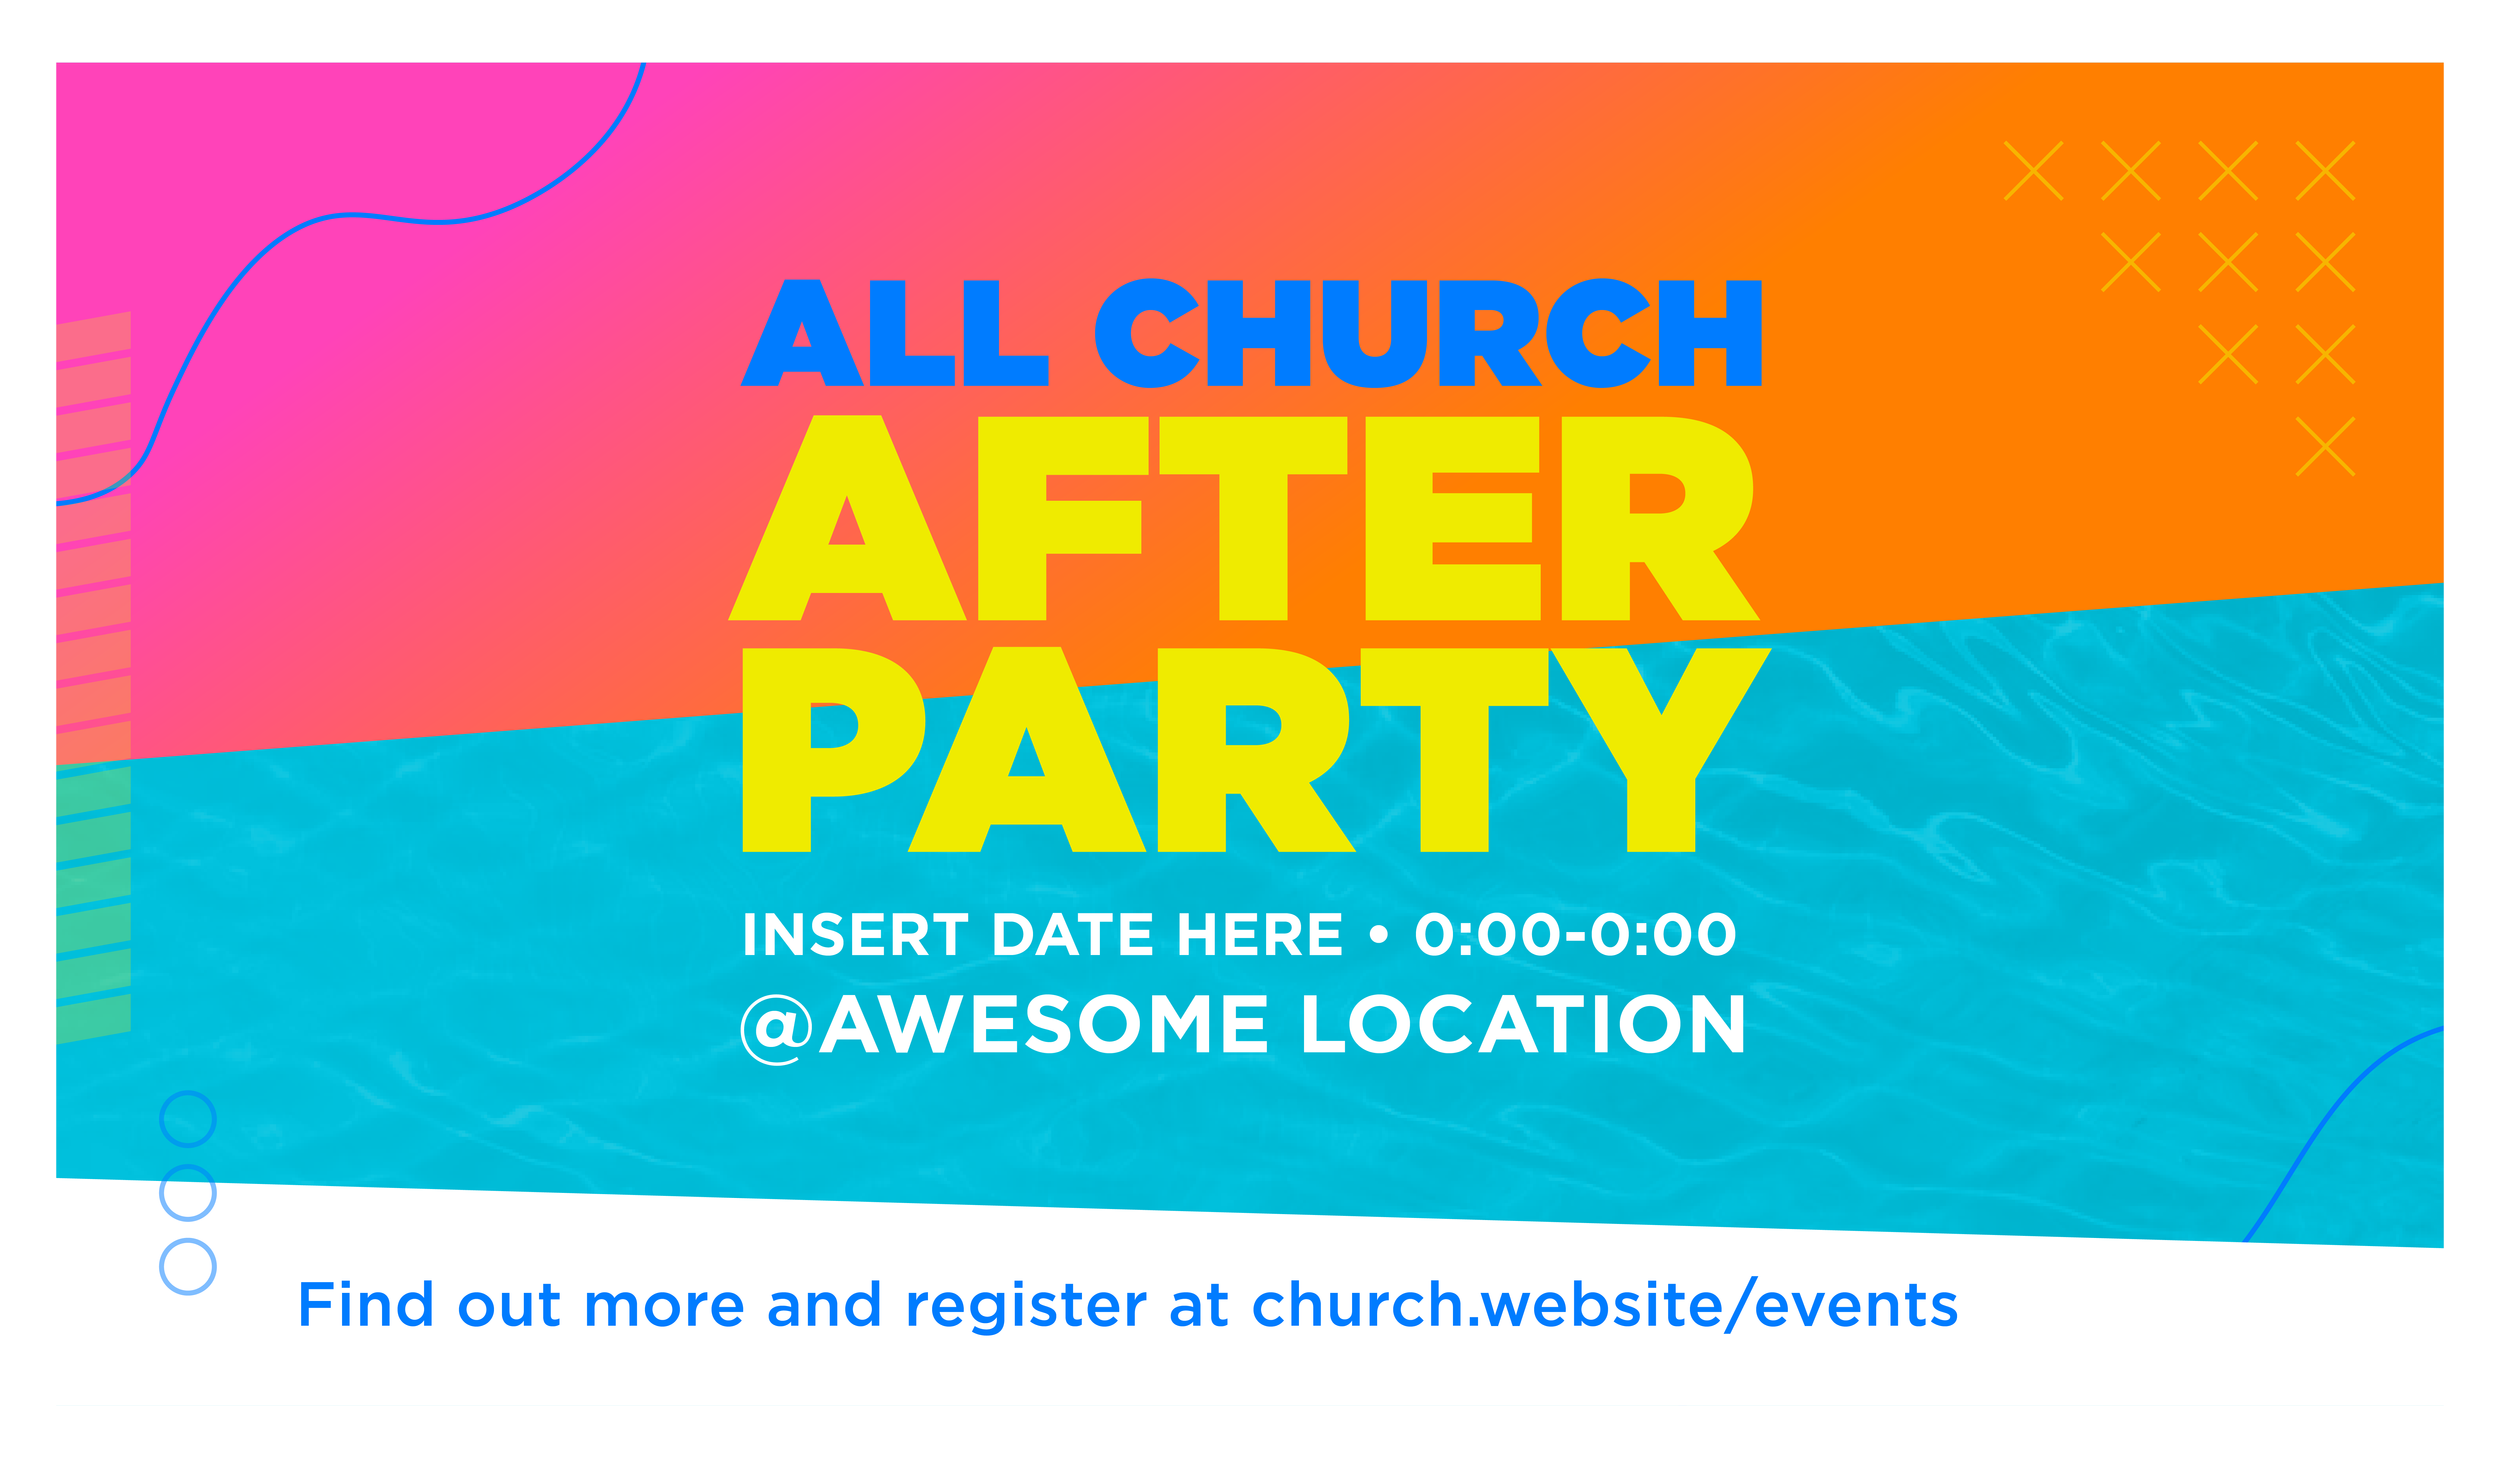 z_Previews_All Church After Party_Promo.png